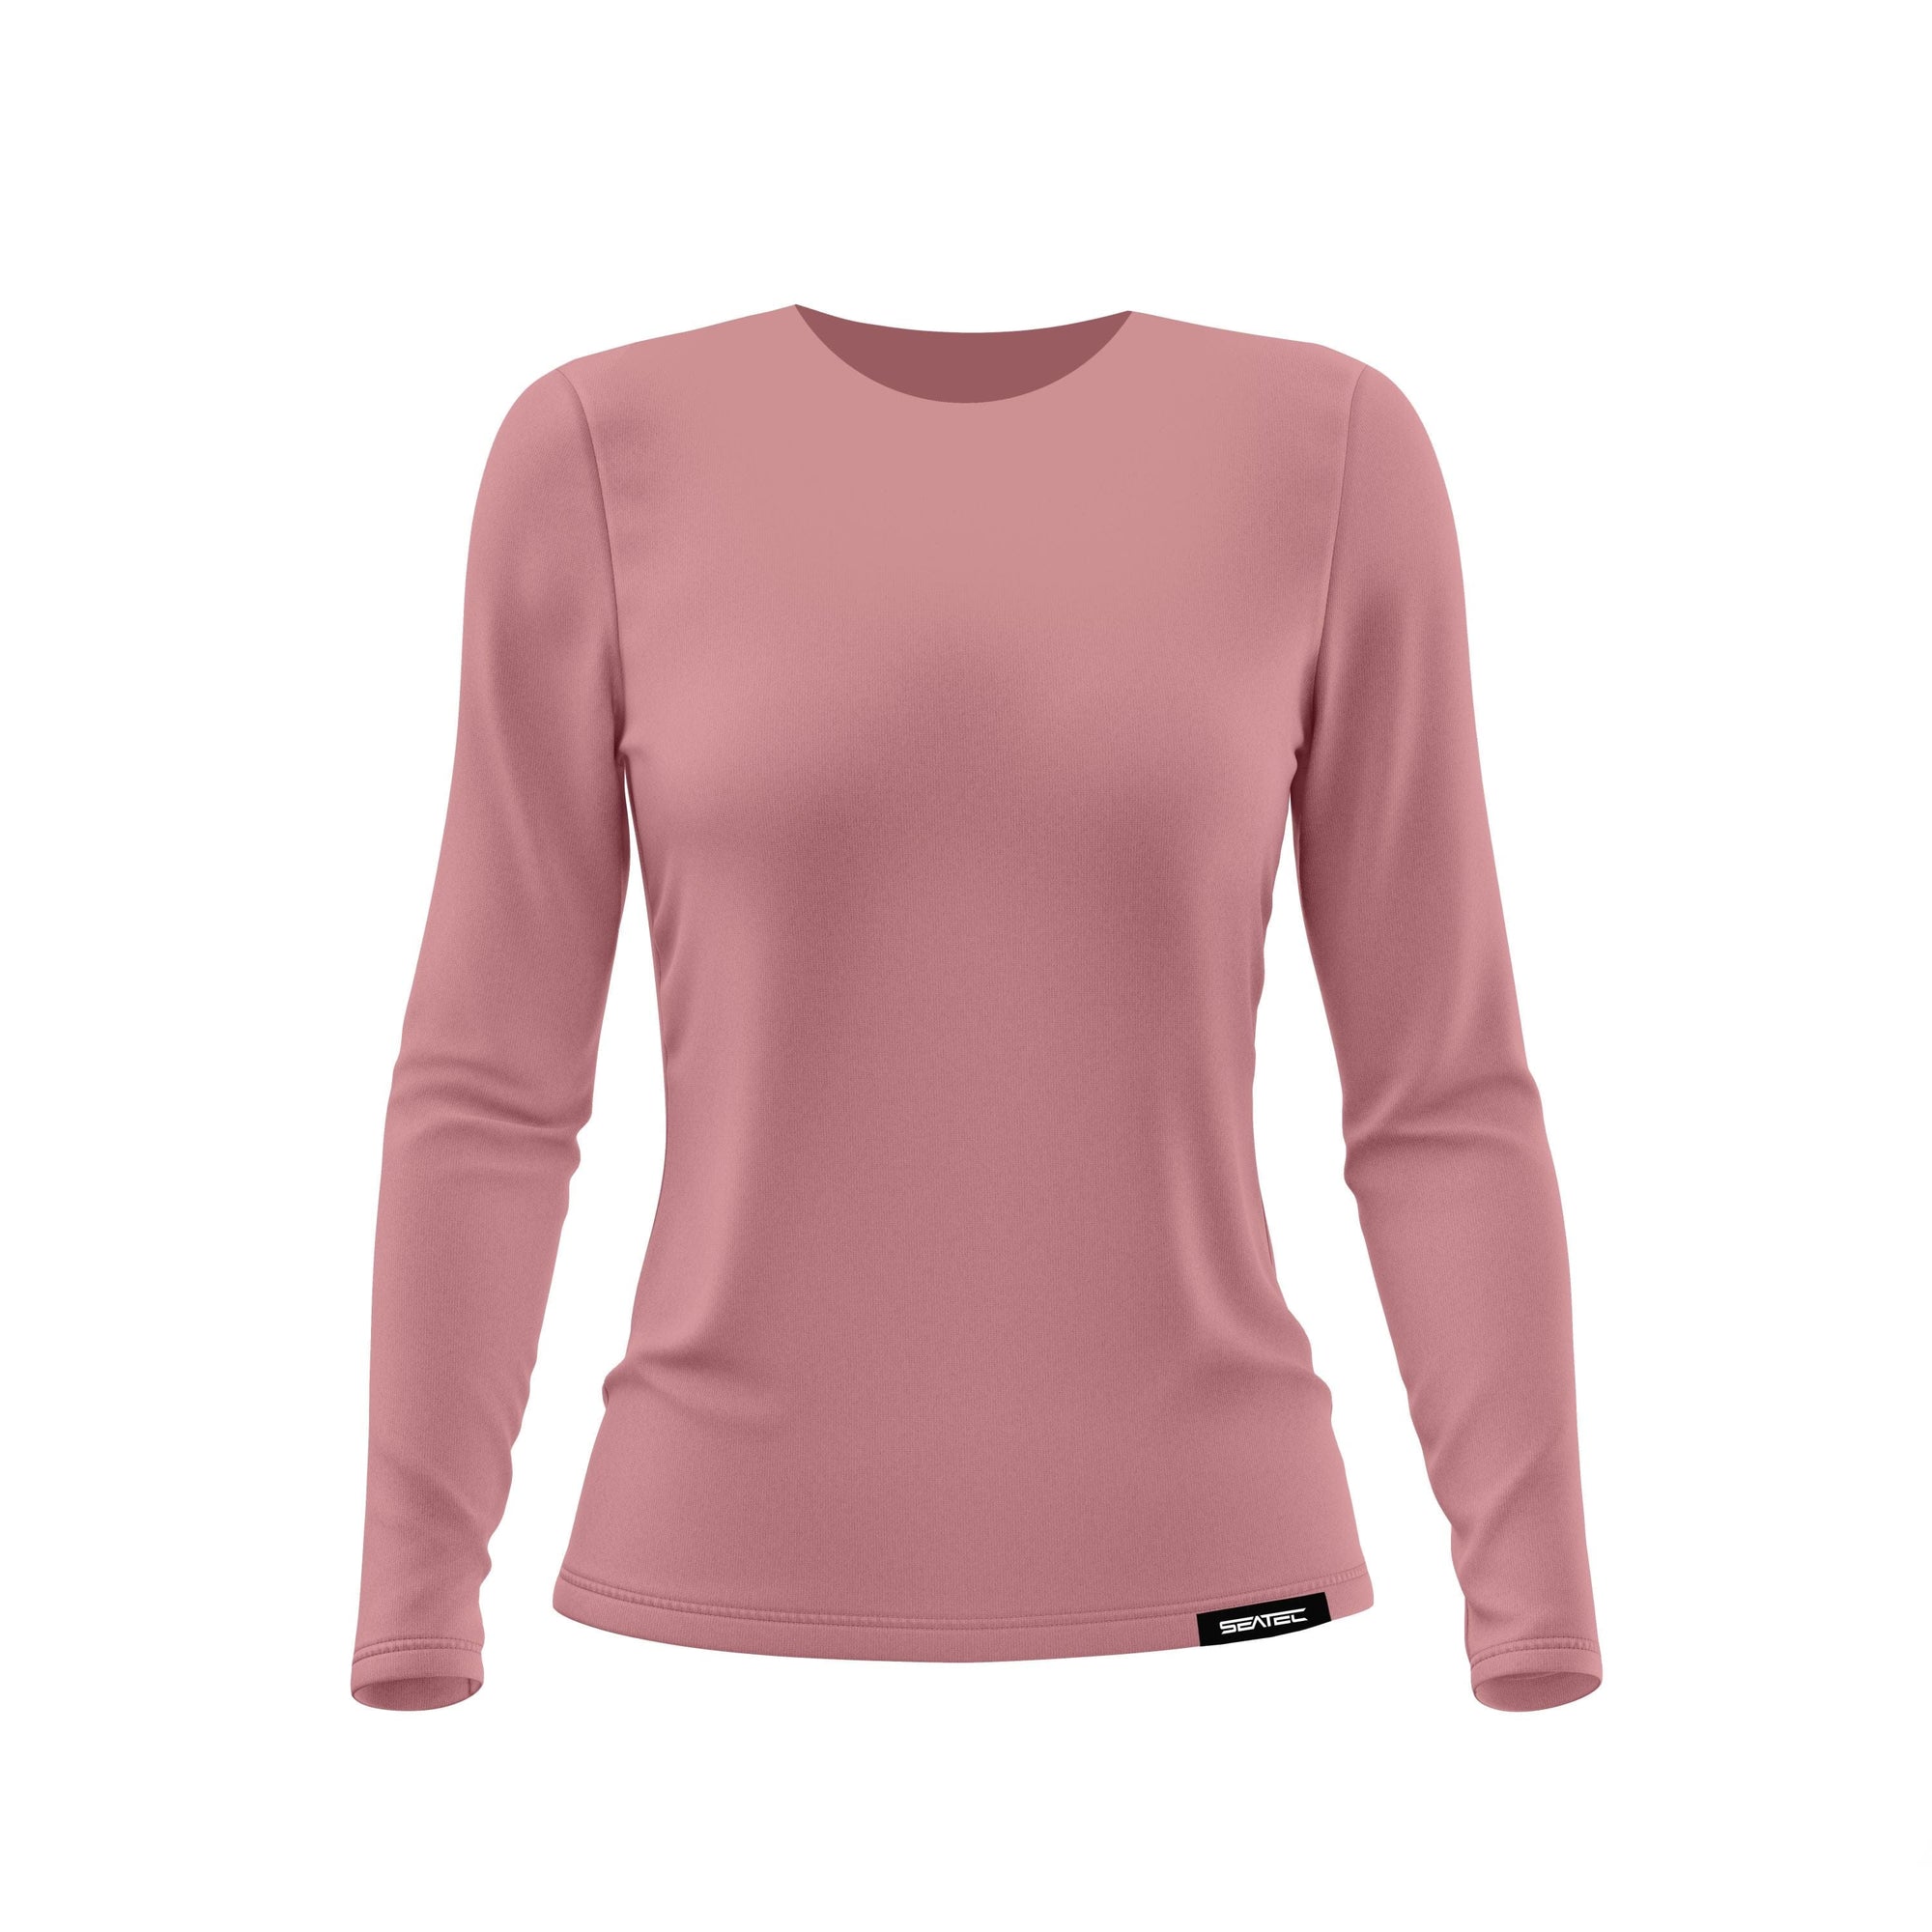 Seatec Outfitters Womens WOMEN'S ACTIVE | ROSE | LS CREW